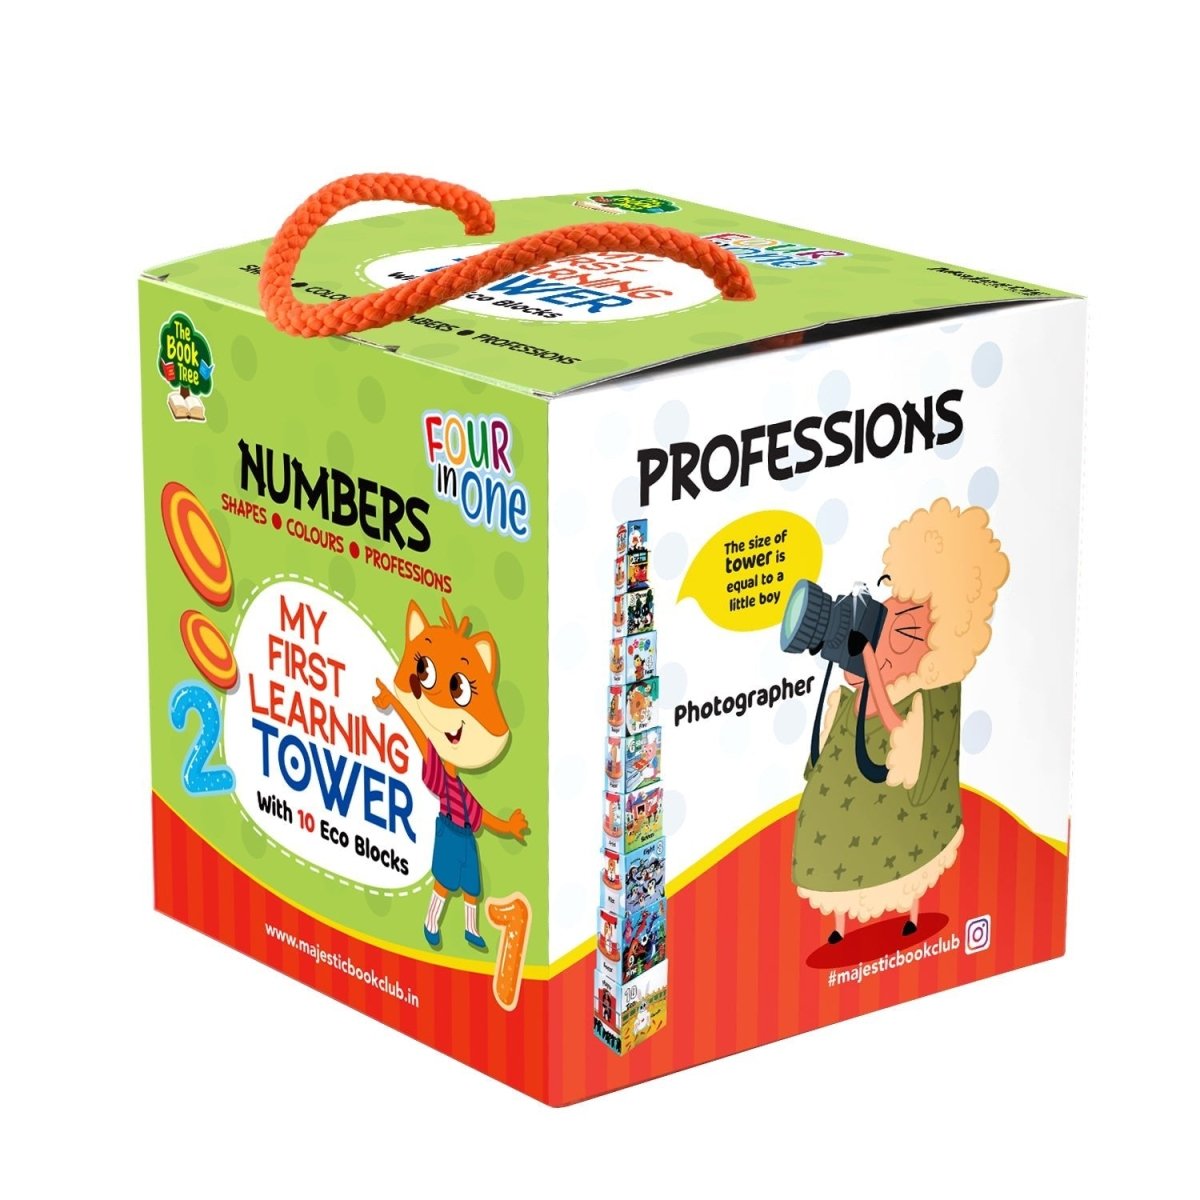 Majestic Book Club MY FIRST LEARNING TOWER- NUMBERS, SHAPES, COLOURS AND PROFESSIONS - Cube Box